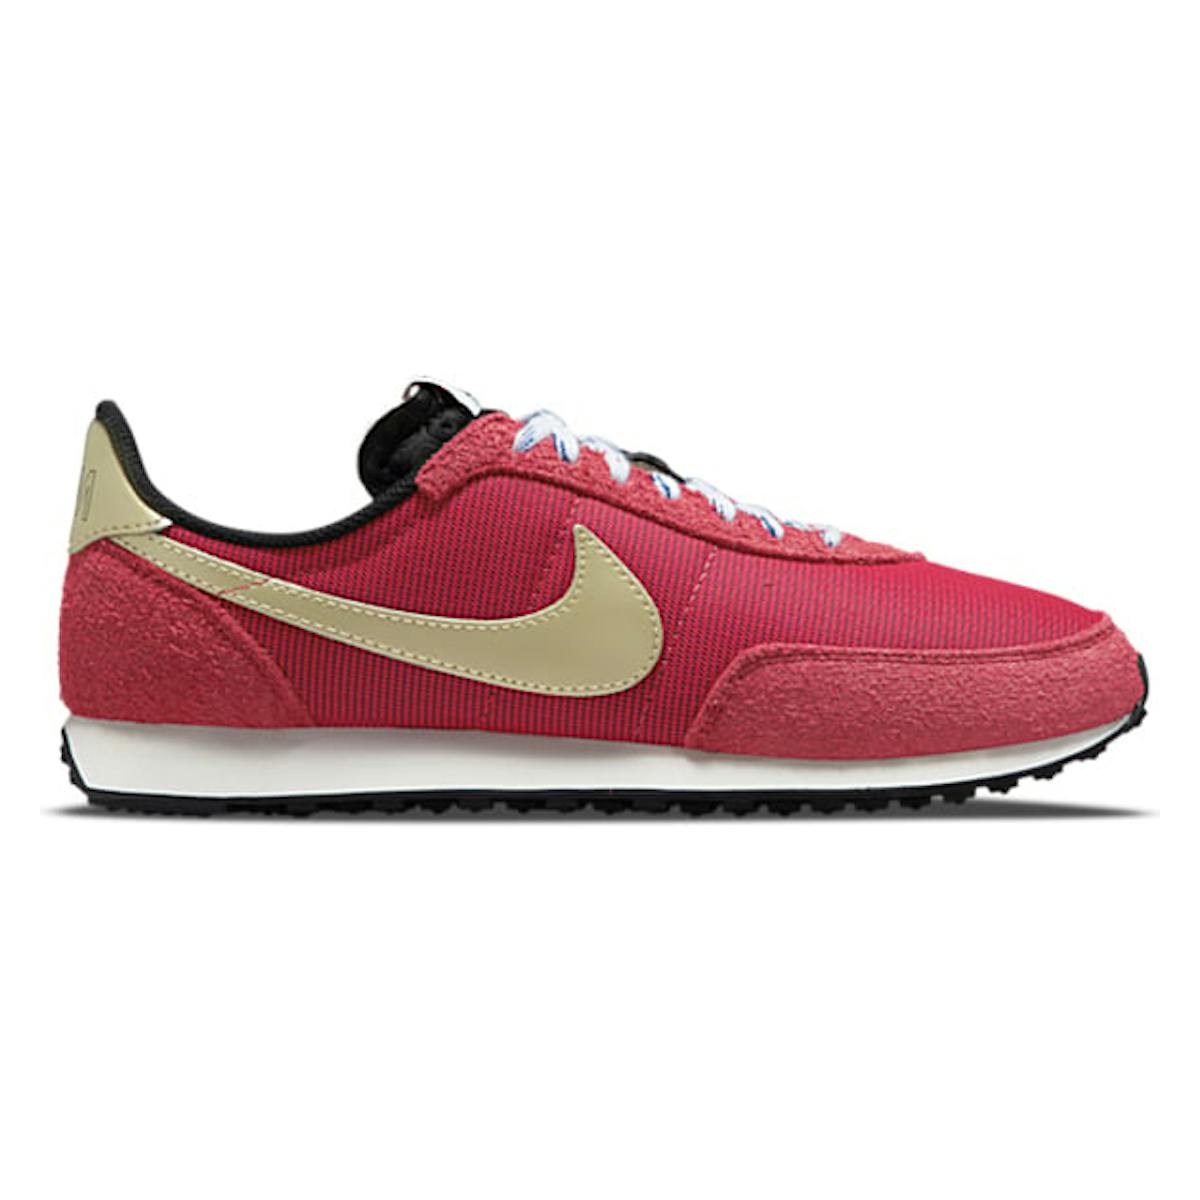 Nike Waffle Trainer 2 SD "Gym Red"